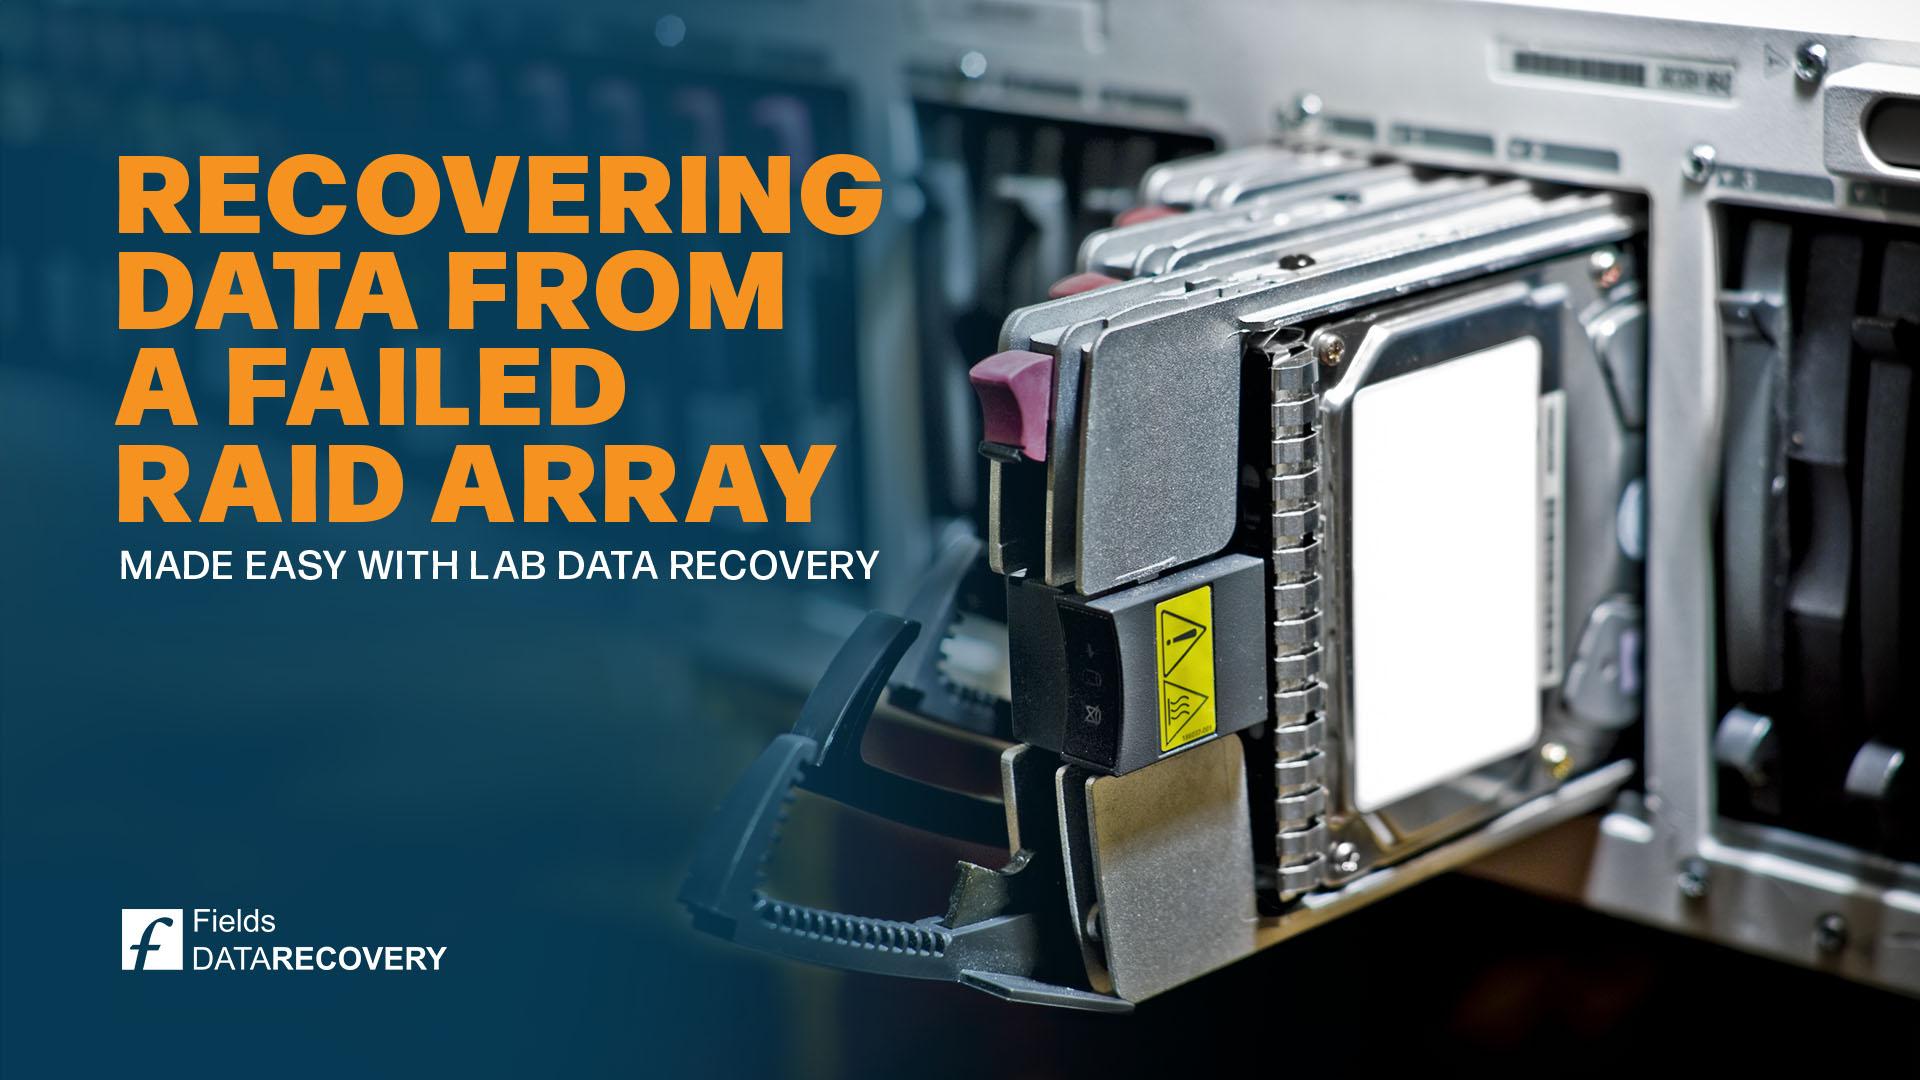 Recovering Data from a Failed RAID Array Made Easy with Lab Data Recovery